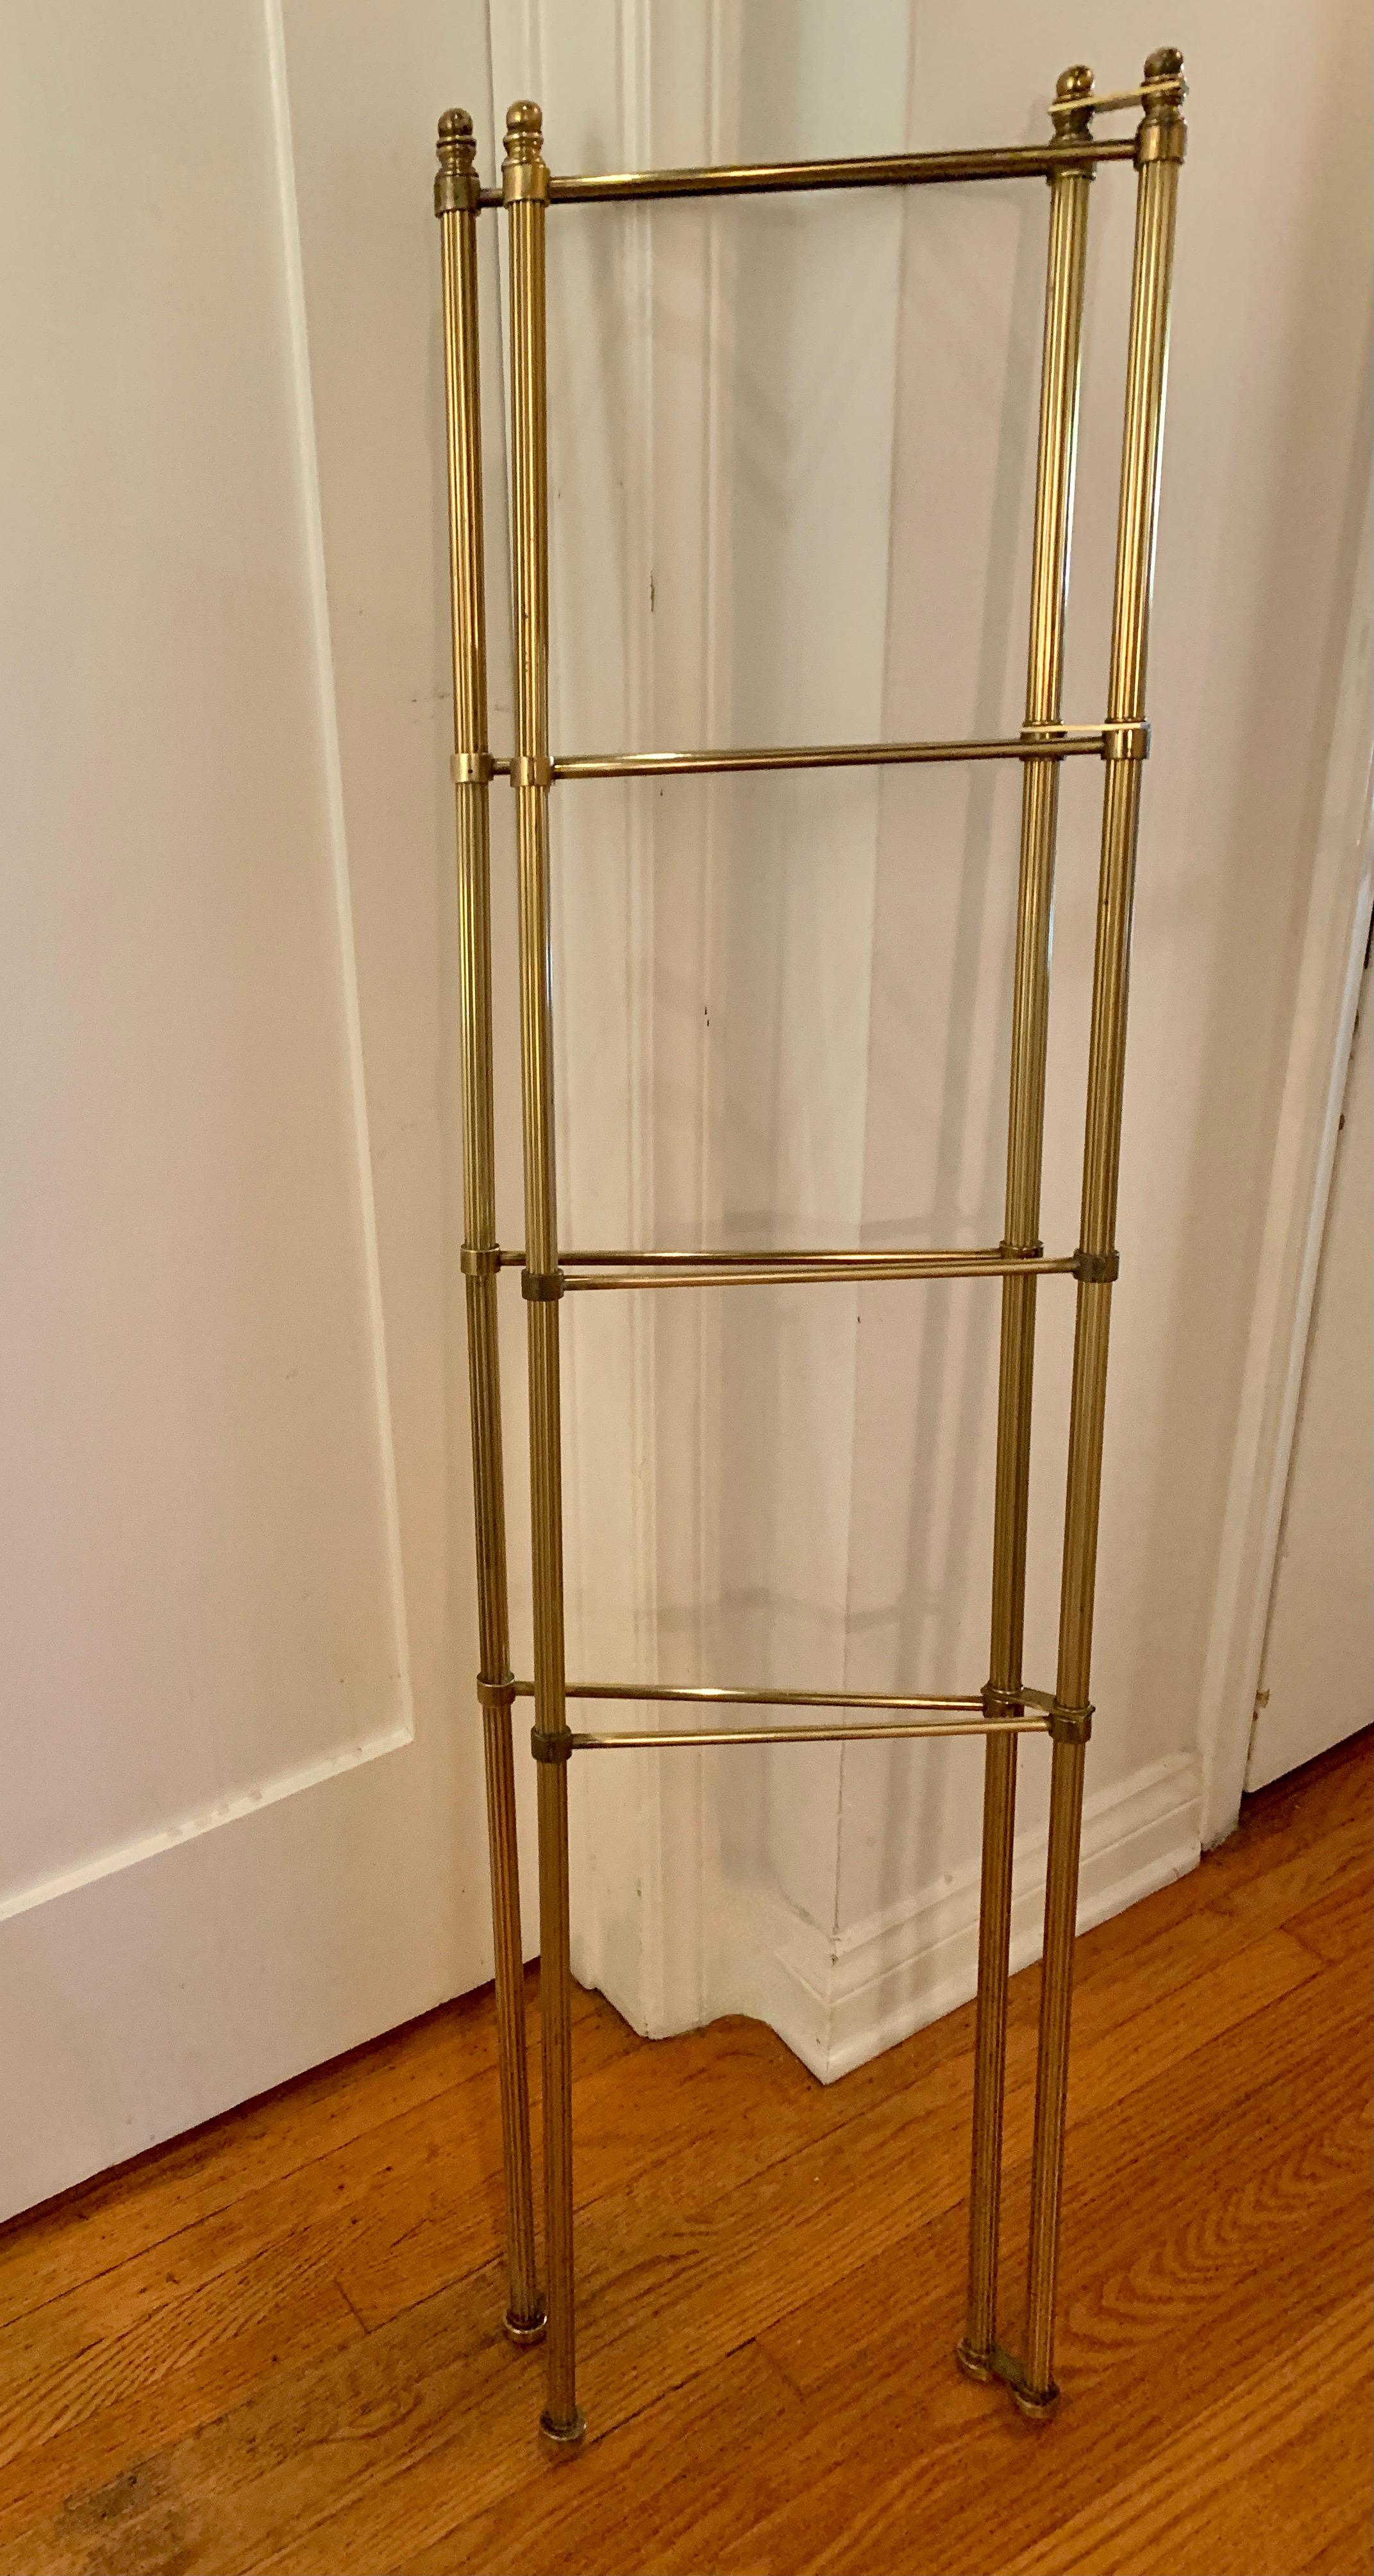 A wonderful vintage brass towel rack with four rods on each side, for a total of 8 places to store towels or other folding textiles. The rods are not adjustable but each side bends to fold accommodating the space it is in, or flat for easy storage.